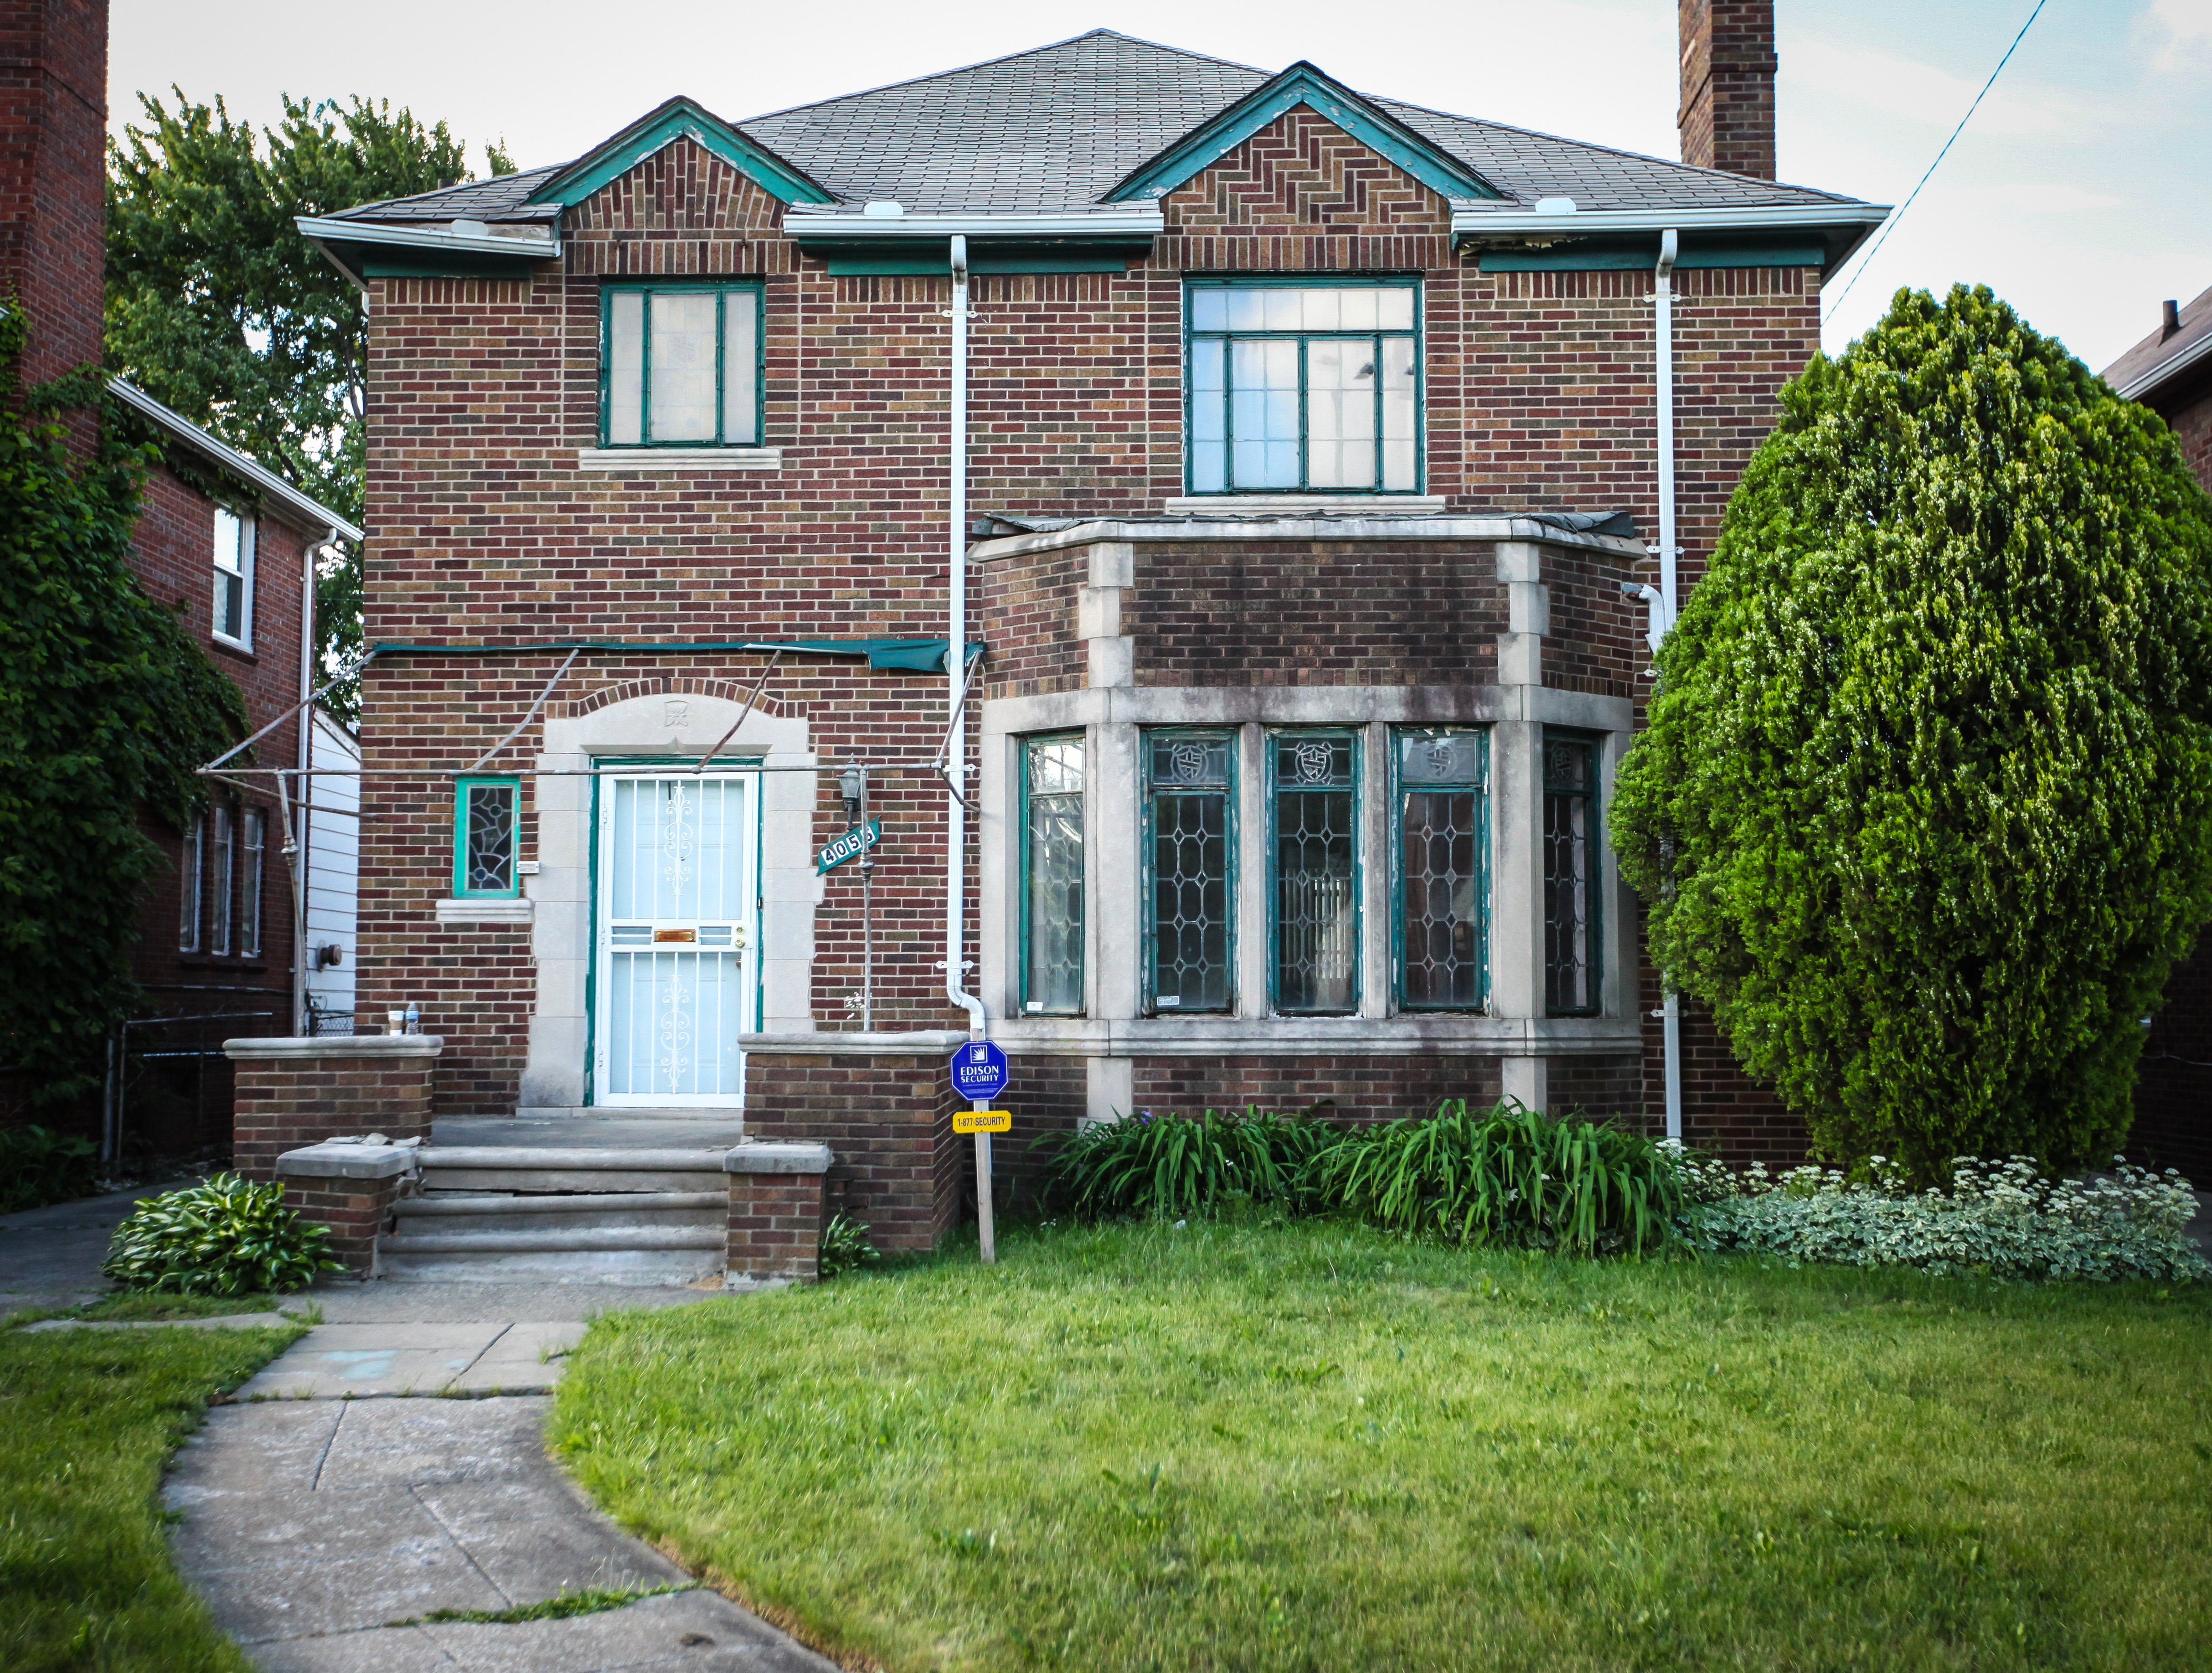 PBS' 'This Old House' to help restore home in northwest Detroit ...